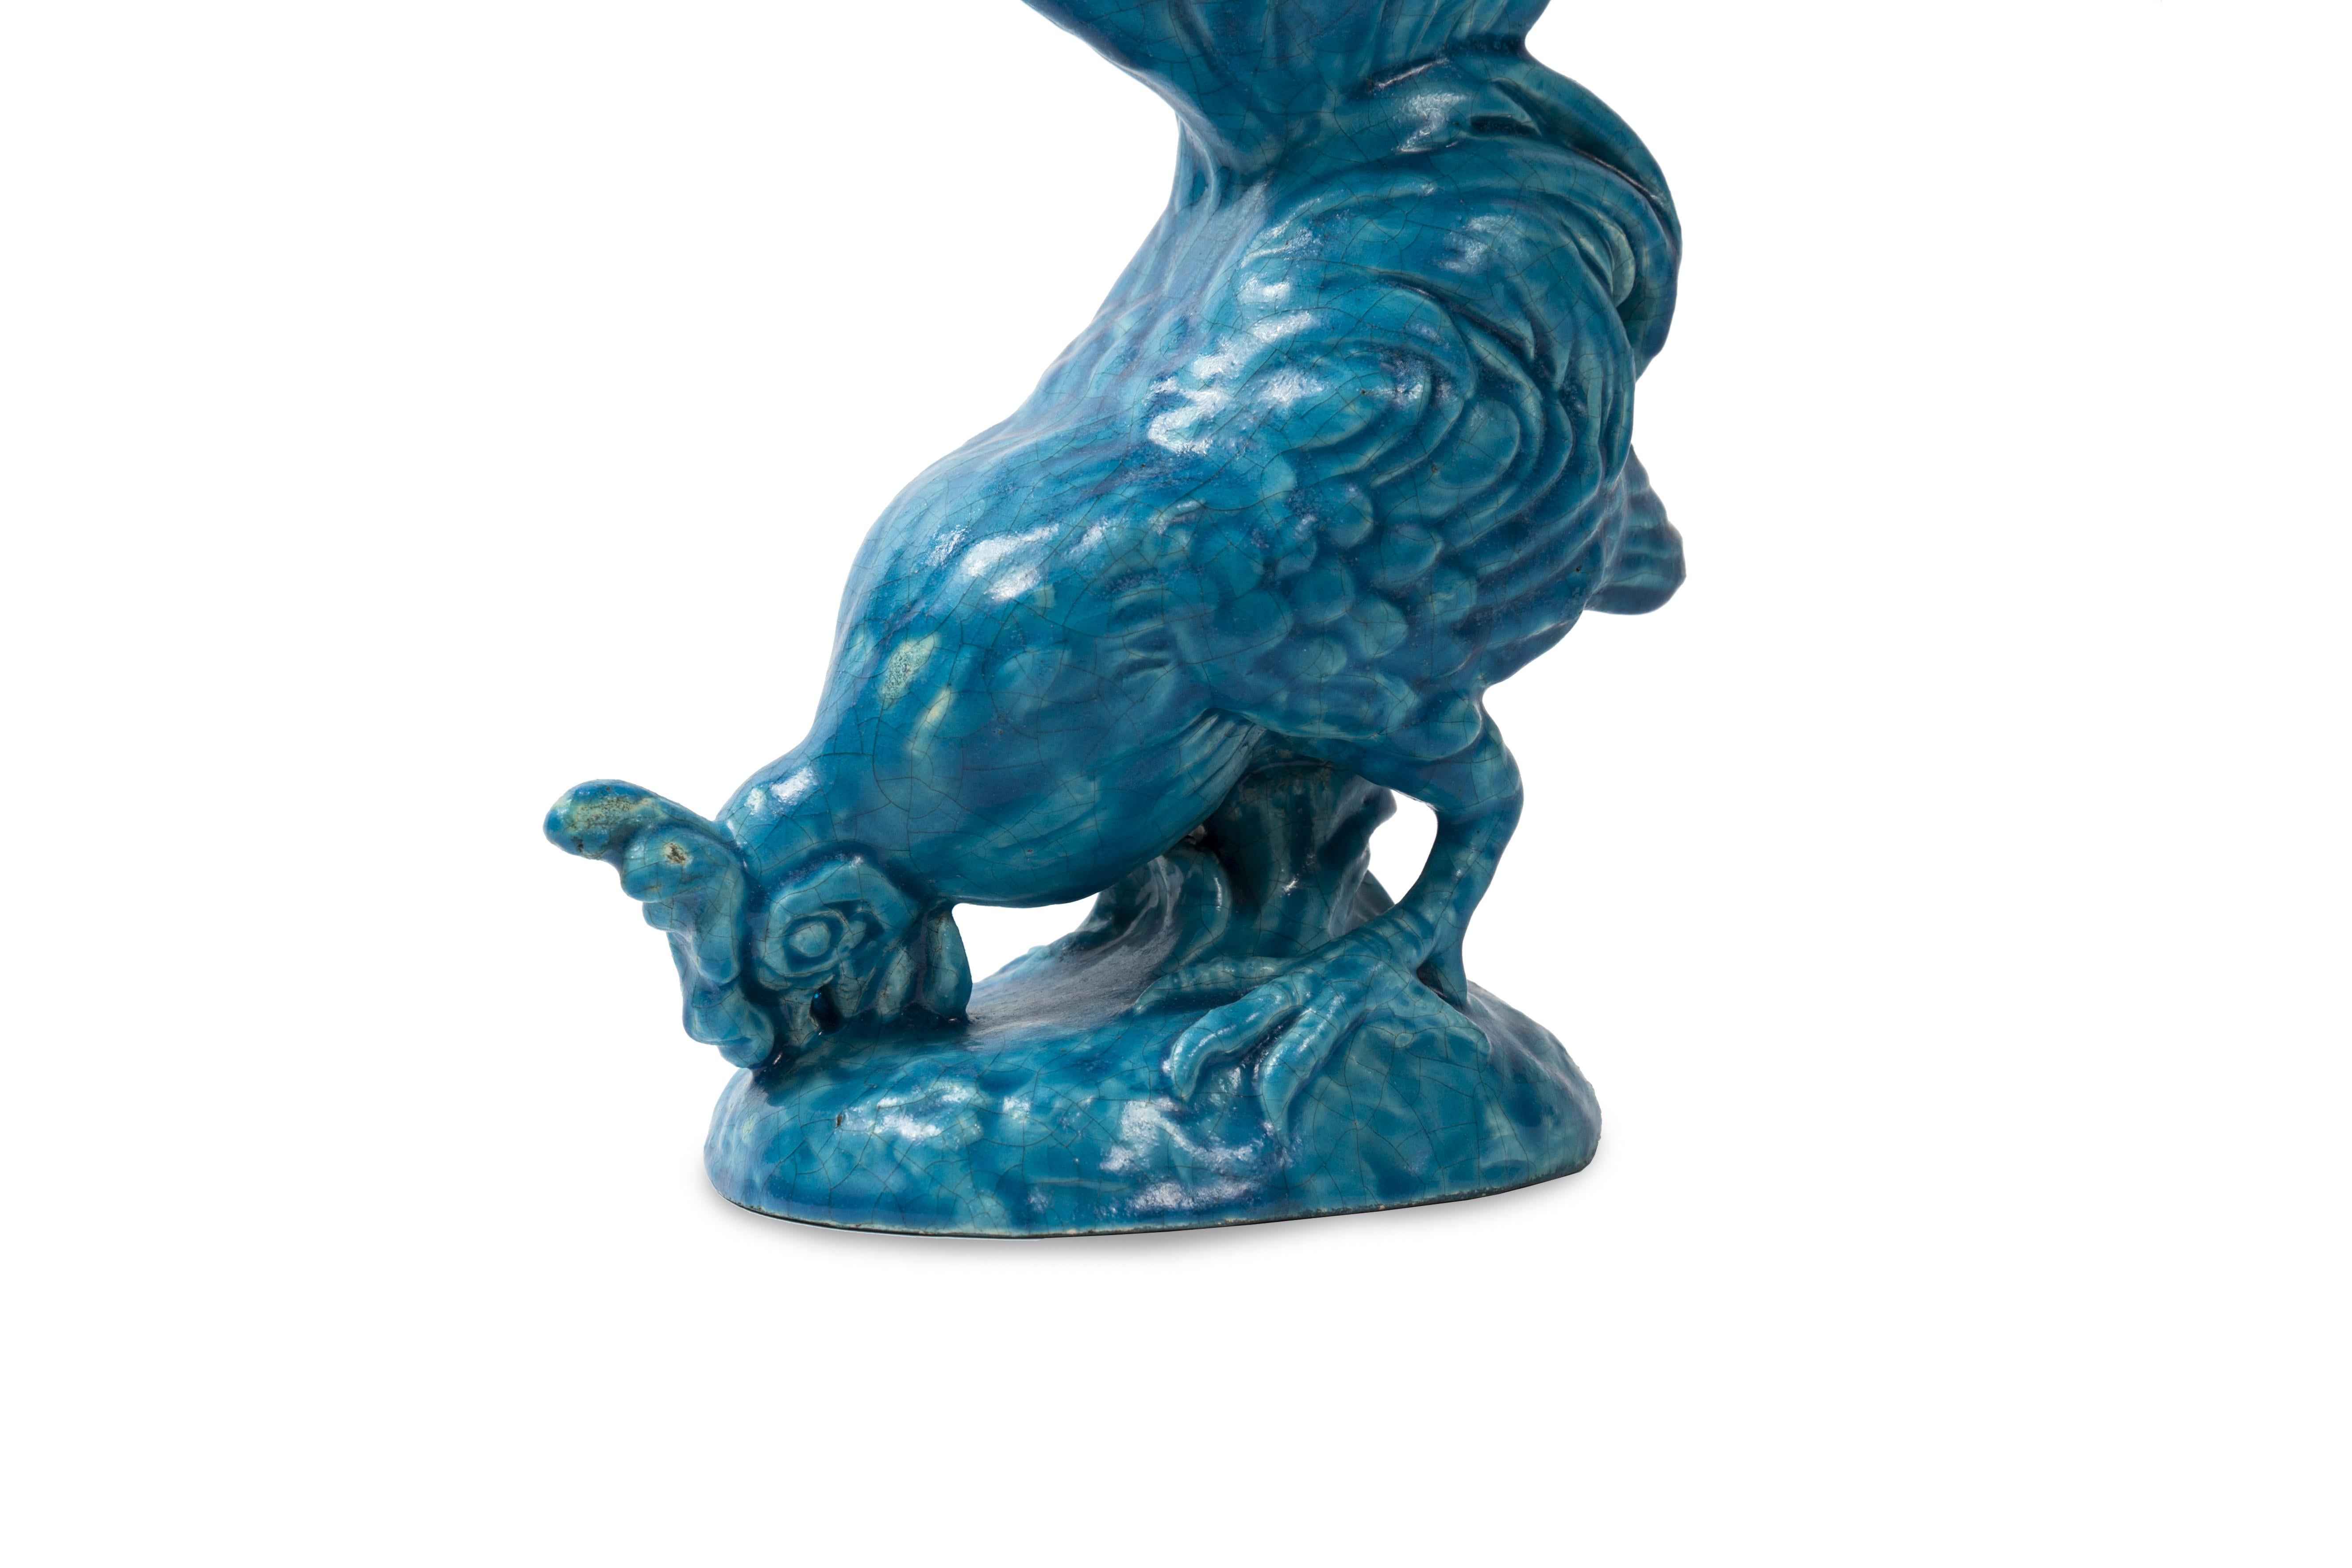 This bright blue earthenware rooster vase is signed Lachenal. This particular turquoise shade is reminiscent of the characteristic blue of Theodore Deck, with whom Lachenal was born before opening his own workshop.

This glazed earthenware rooster